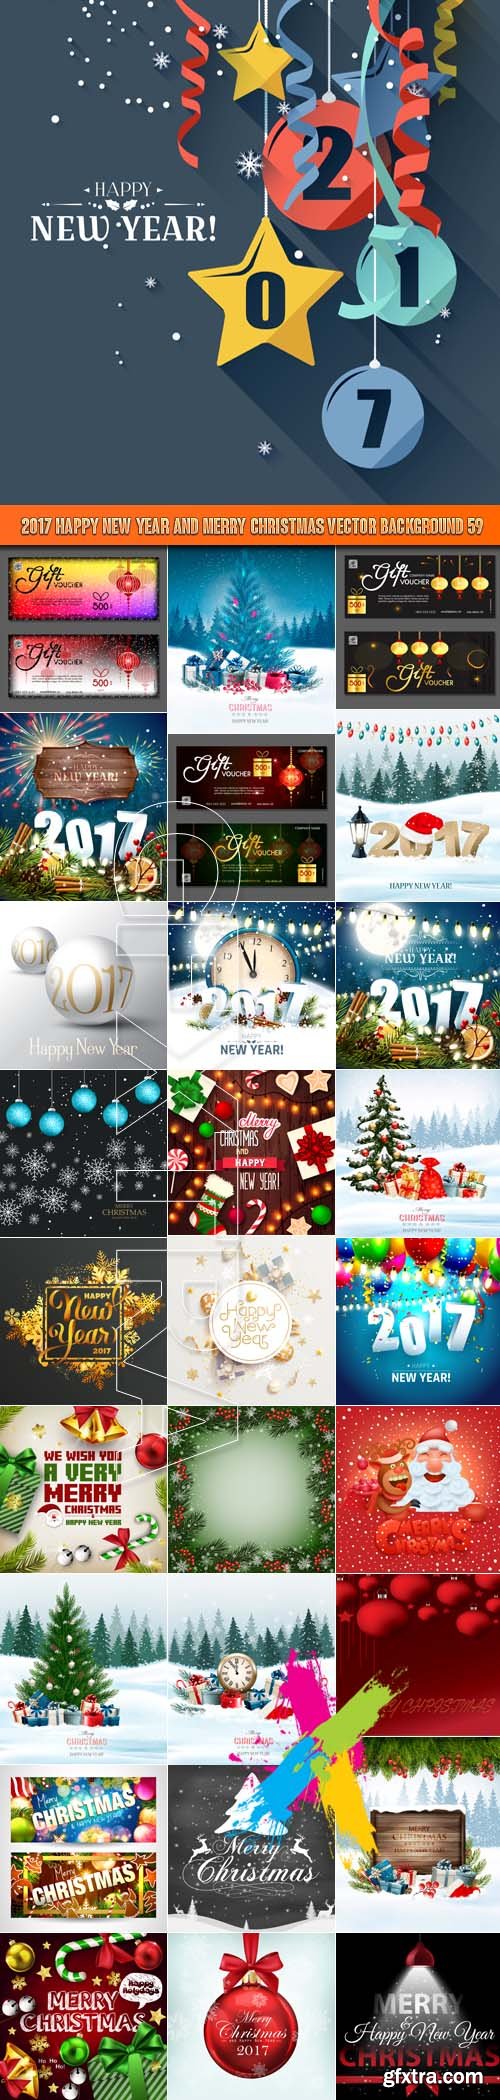 2017 Happy New Year and Merry Christmas vector background 59